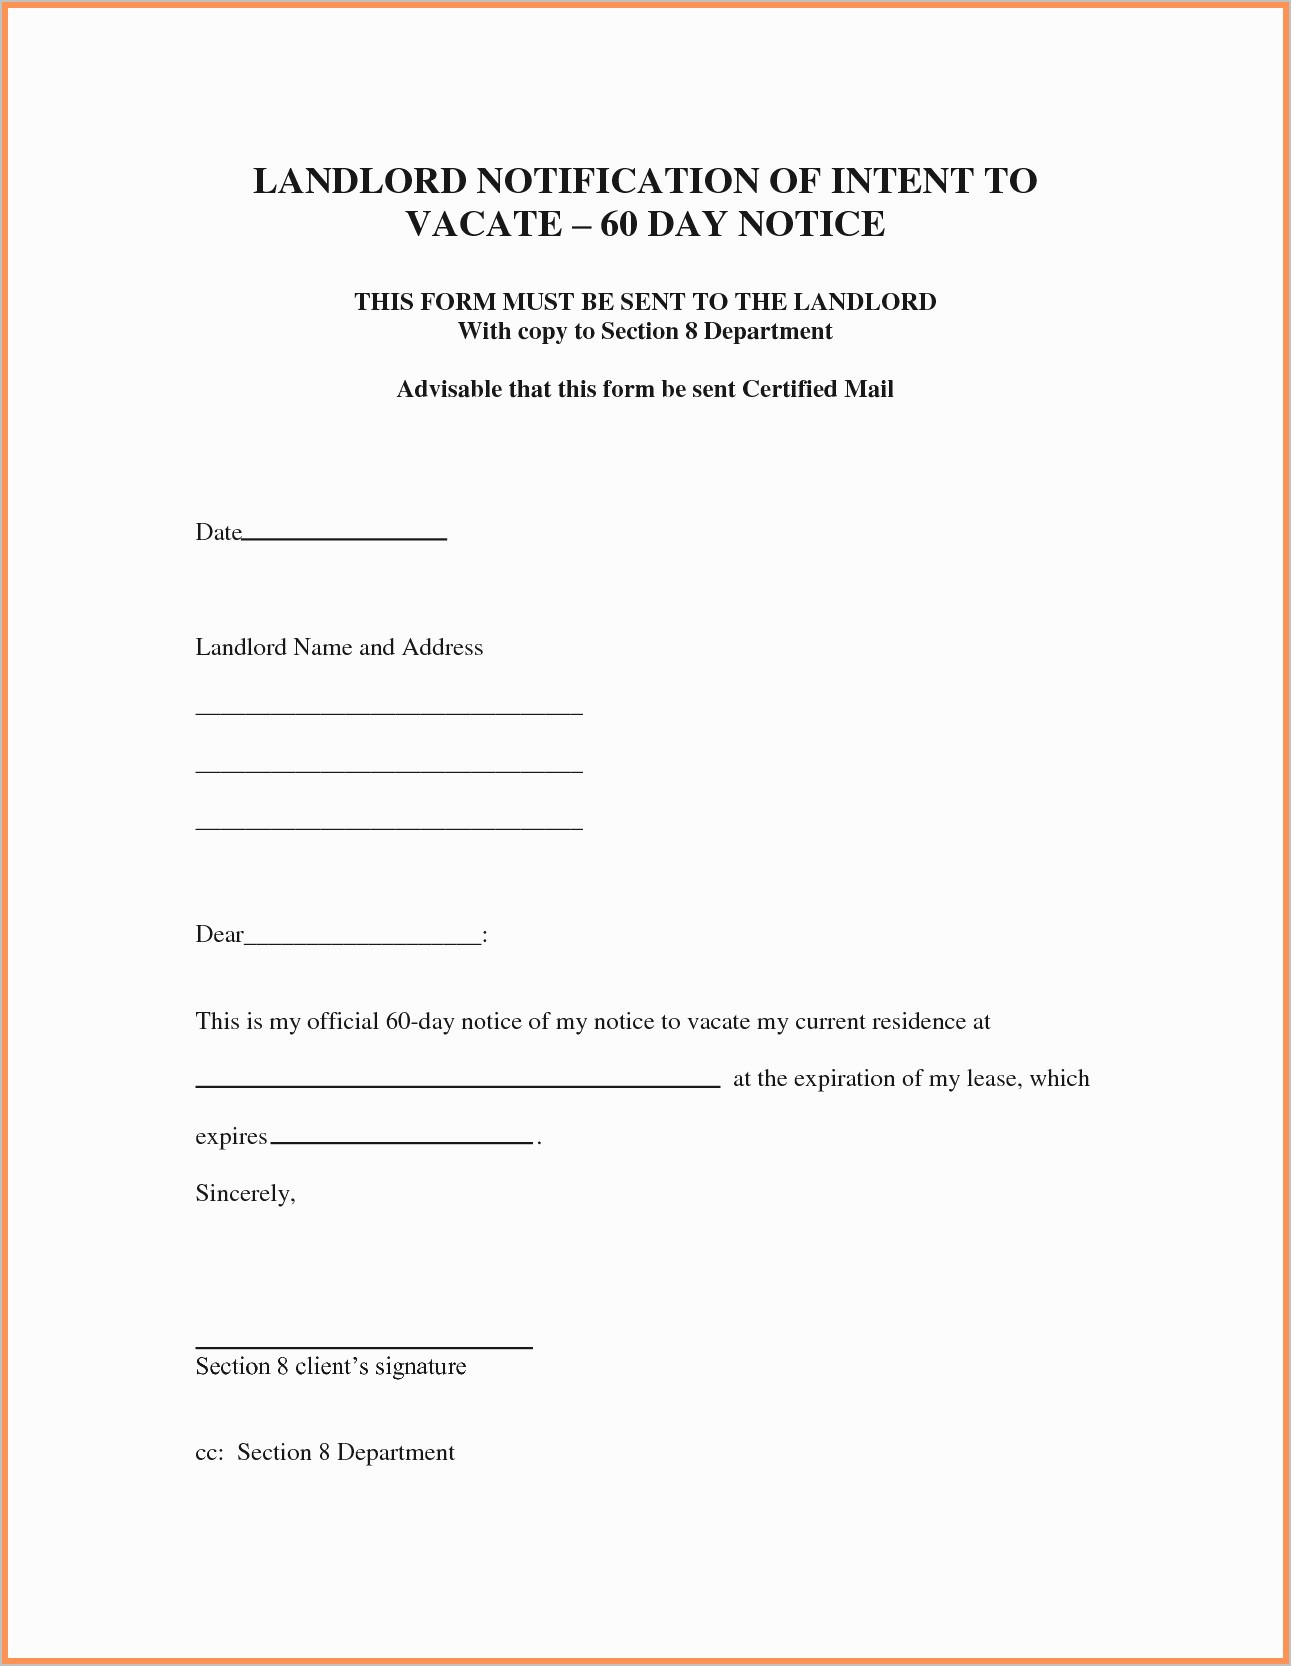 Letter Of Intent to Evict Template - Notice to Vacate form Elegant Eviction Notice Example Eviction